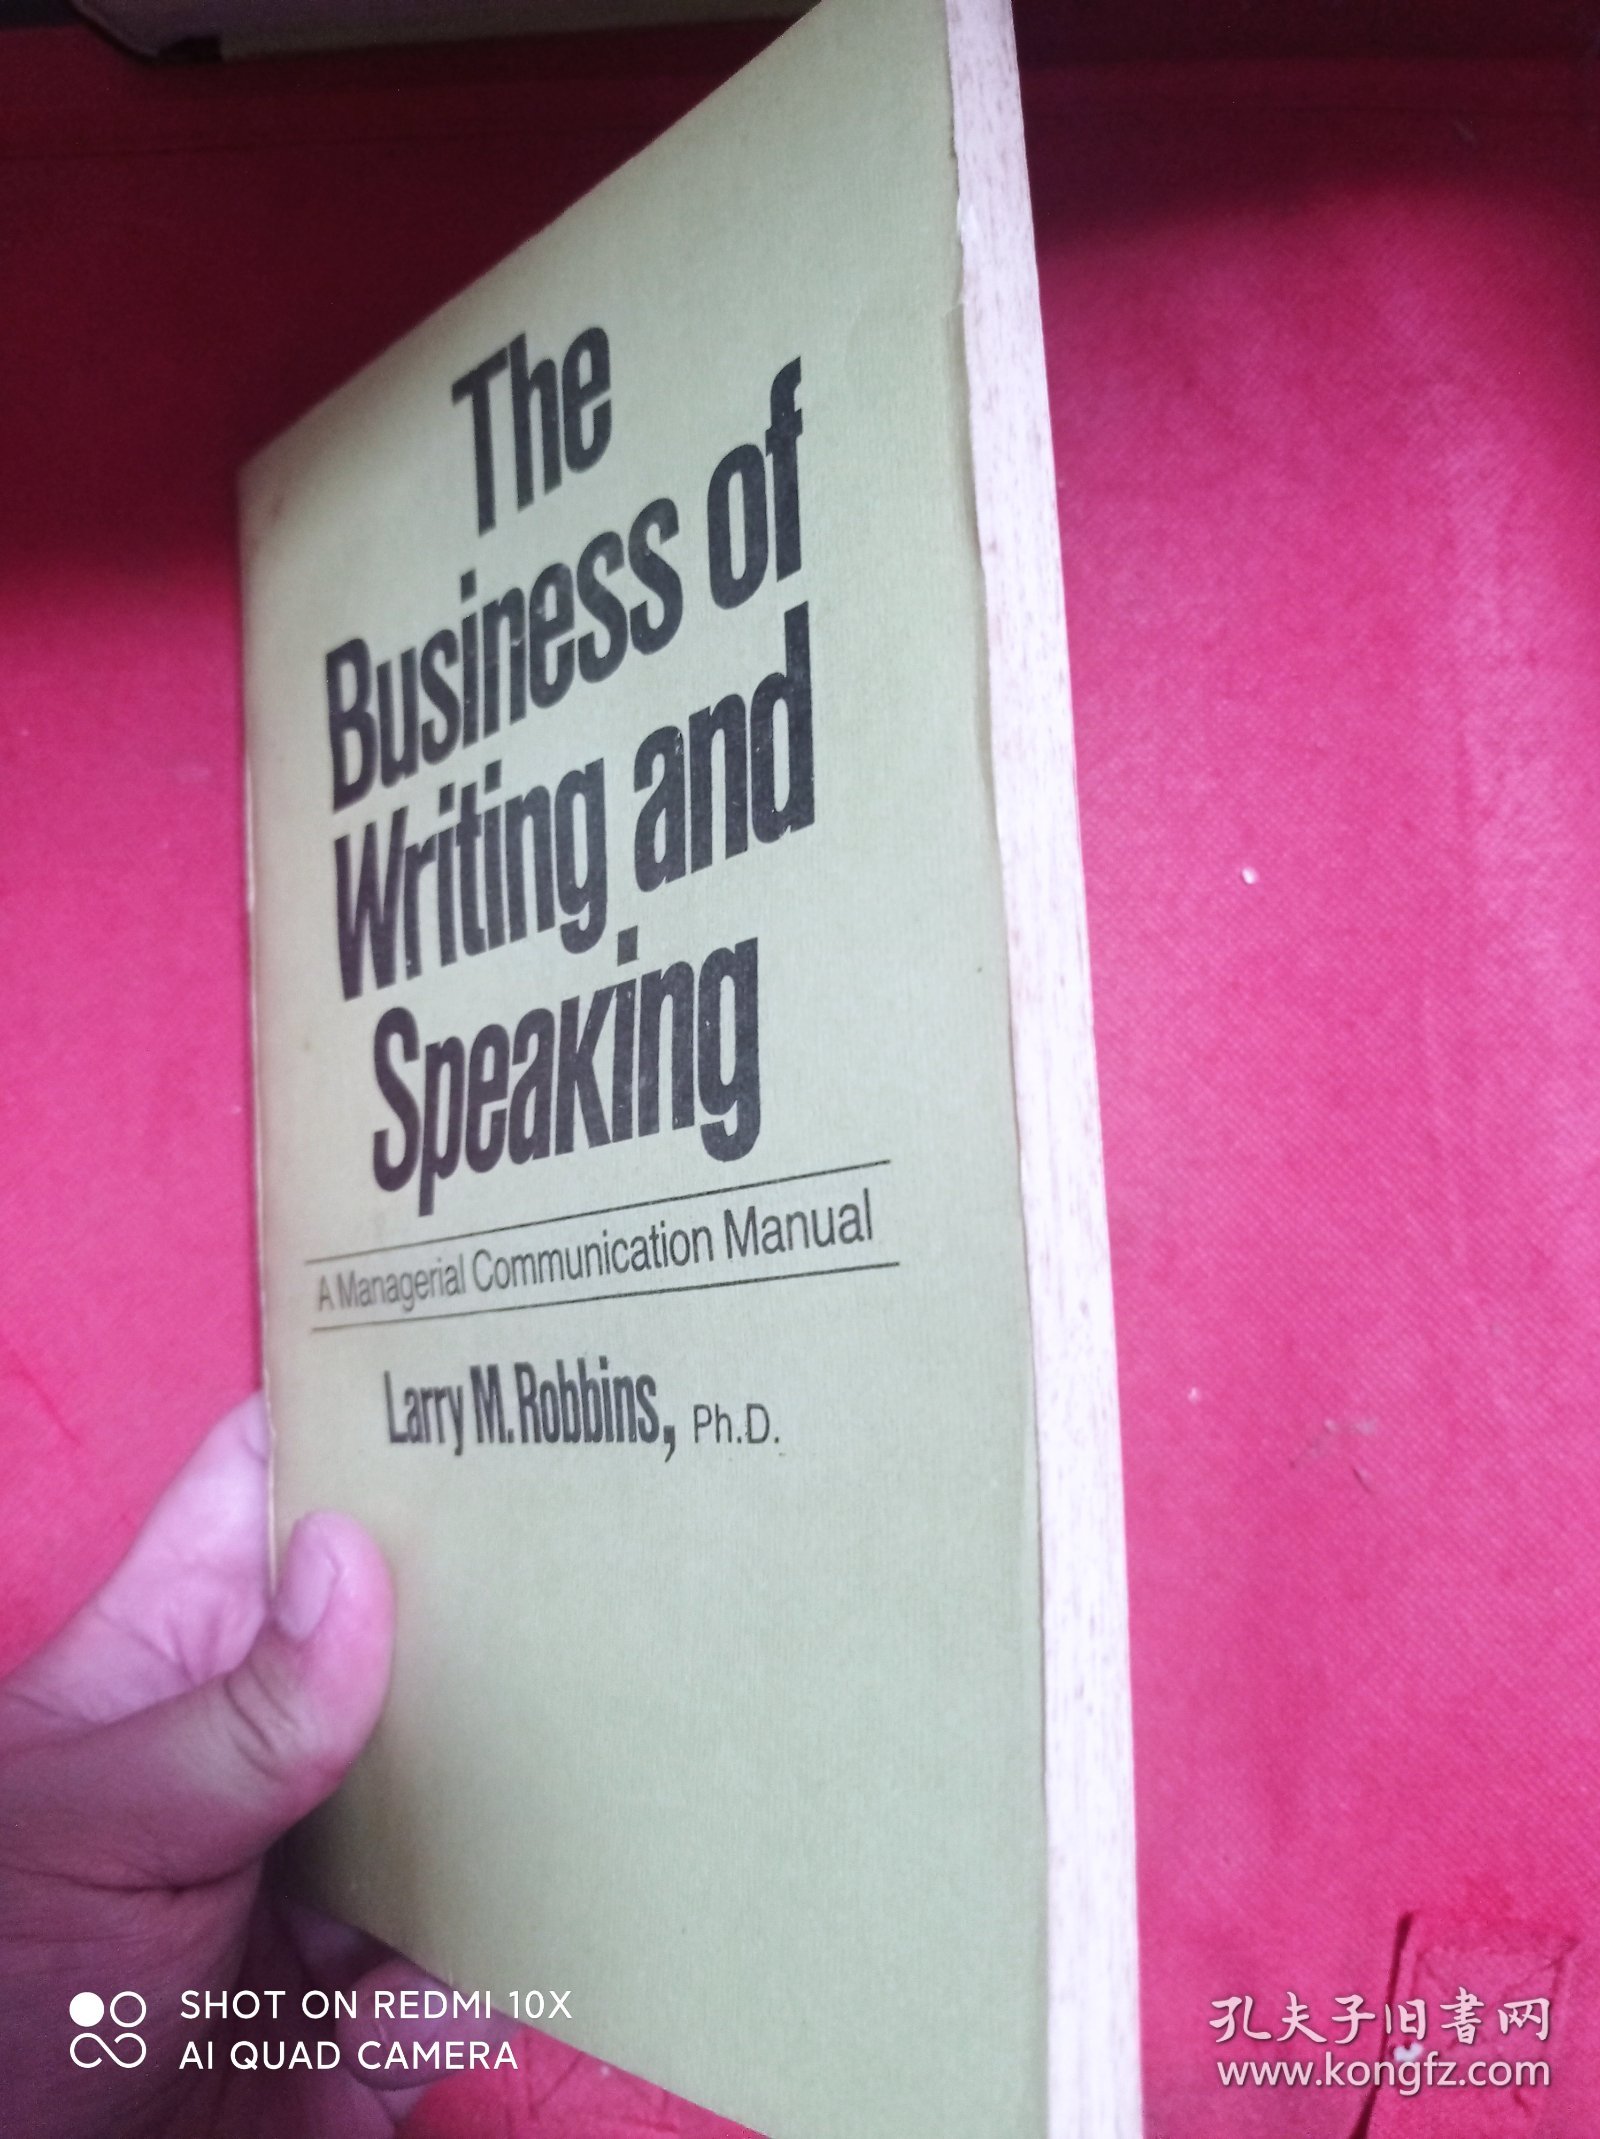 THE BUSINESS OF WRITING AND SPEAKING